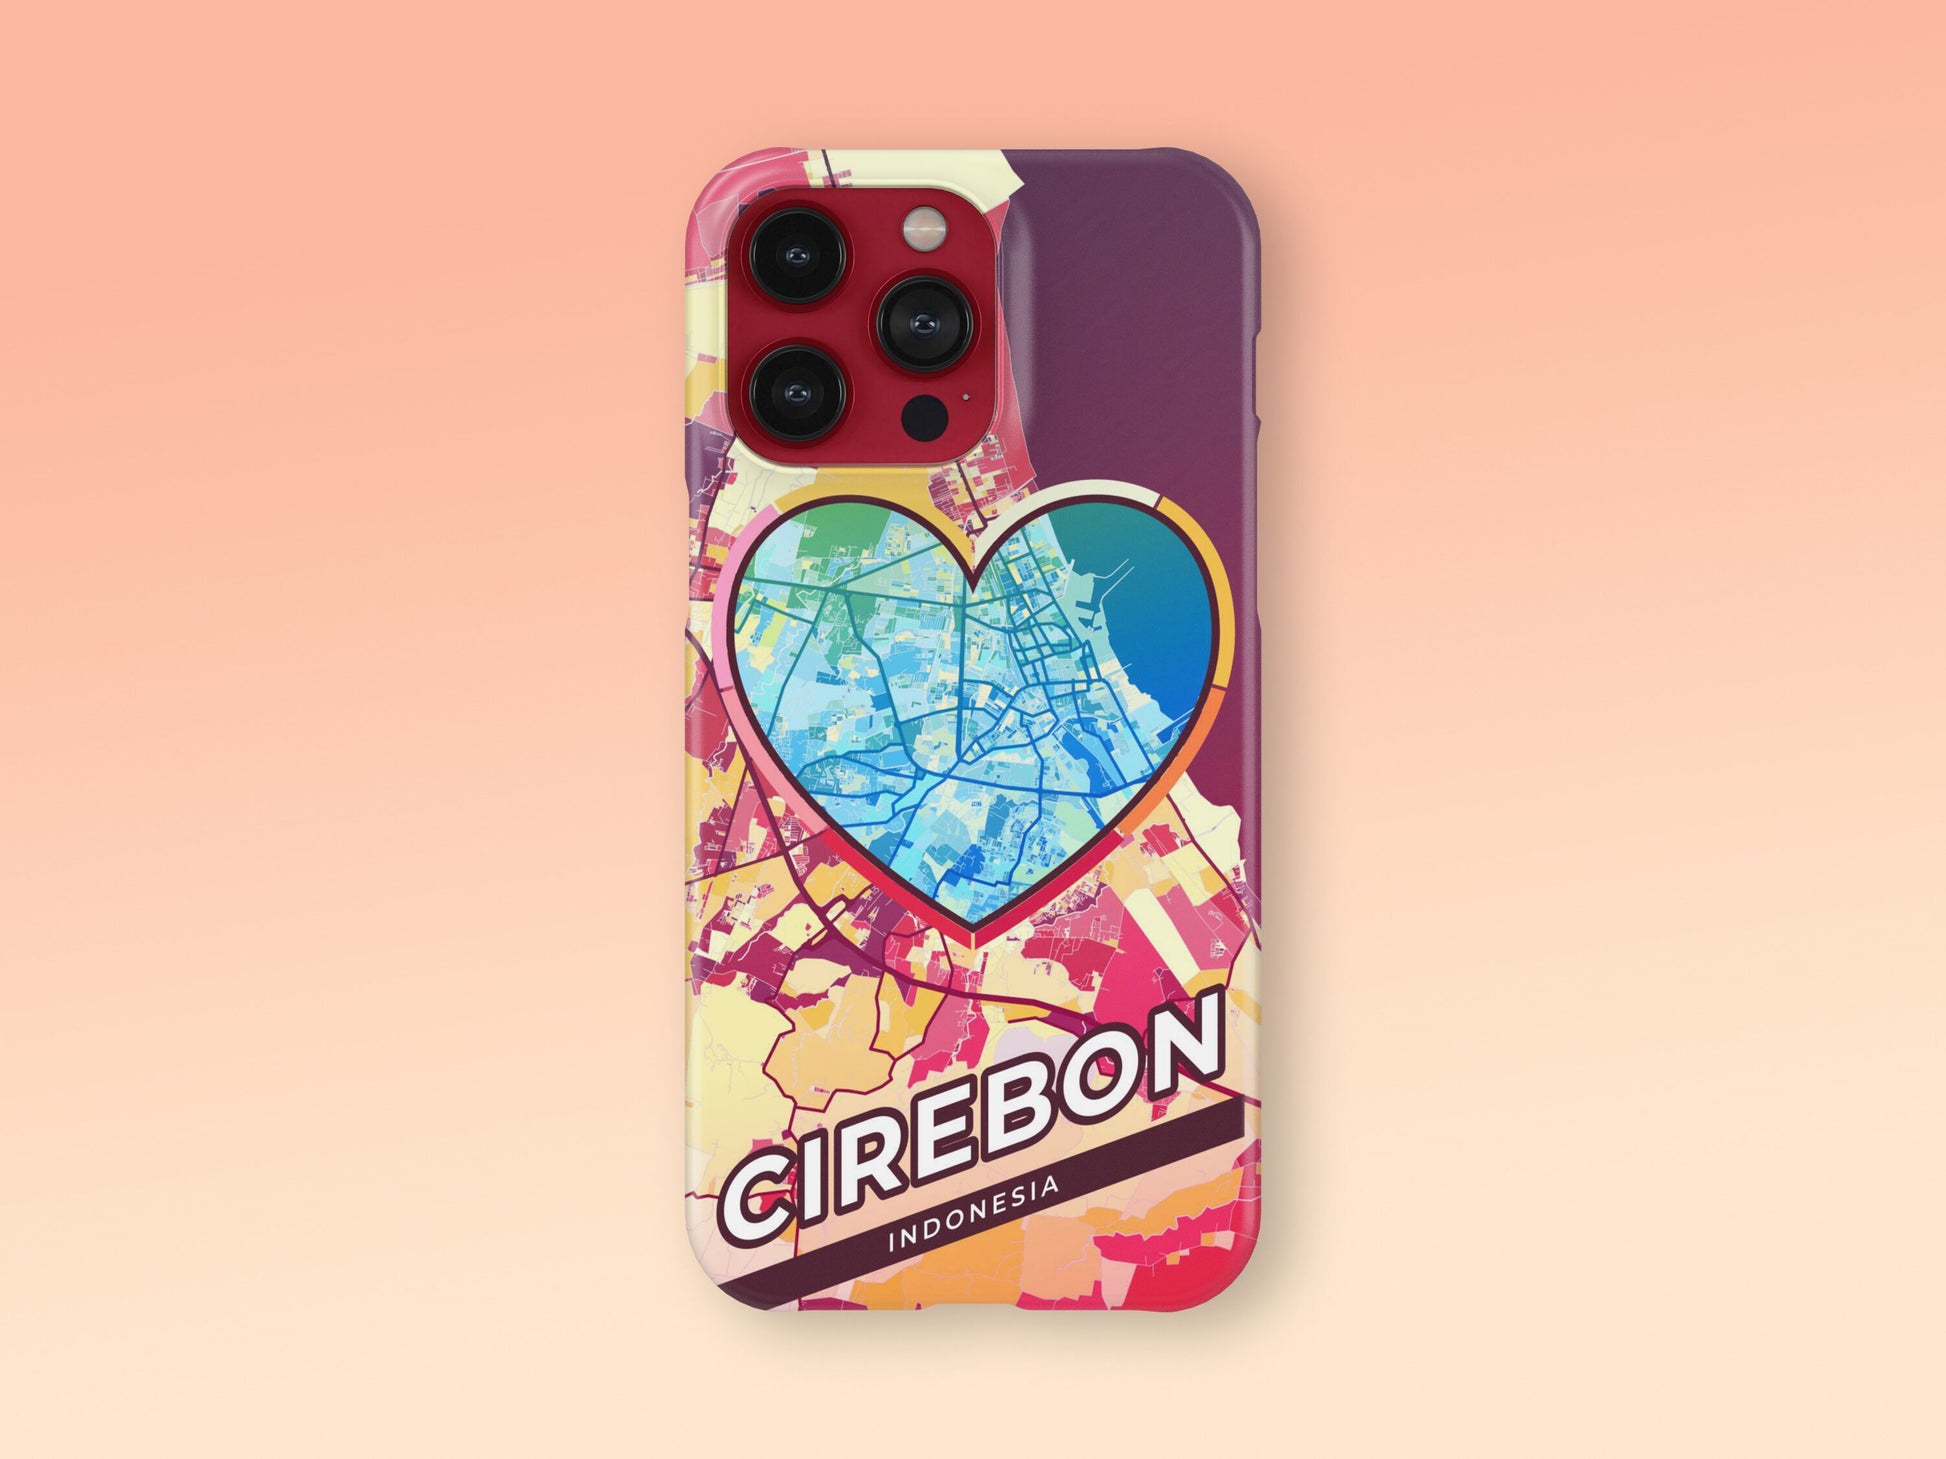 Cirebon Indonesia slim phone case with colorful icon. Birthday, wedding or housewarming gift. Couple match cases. 2